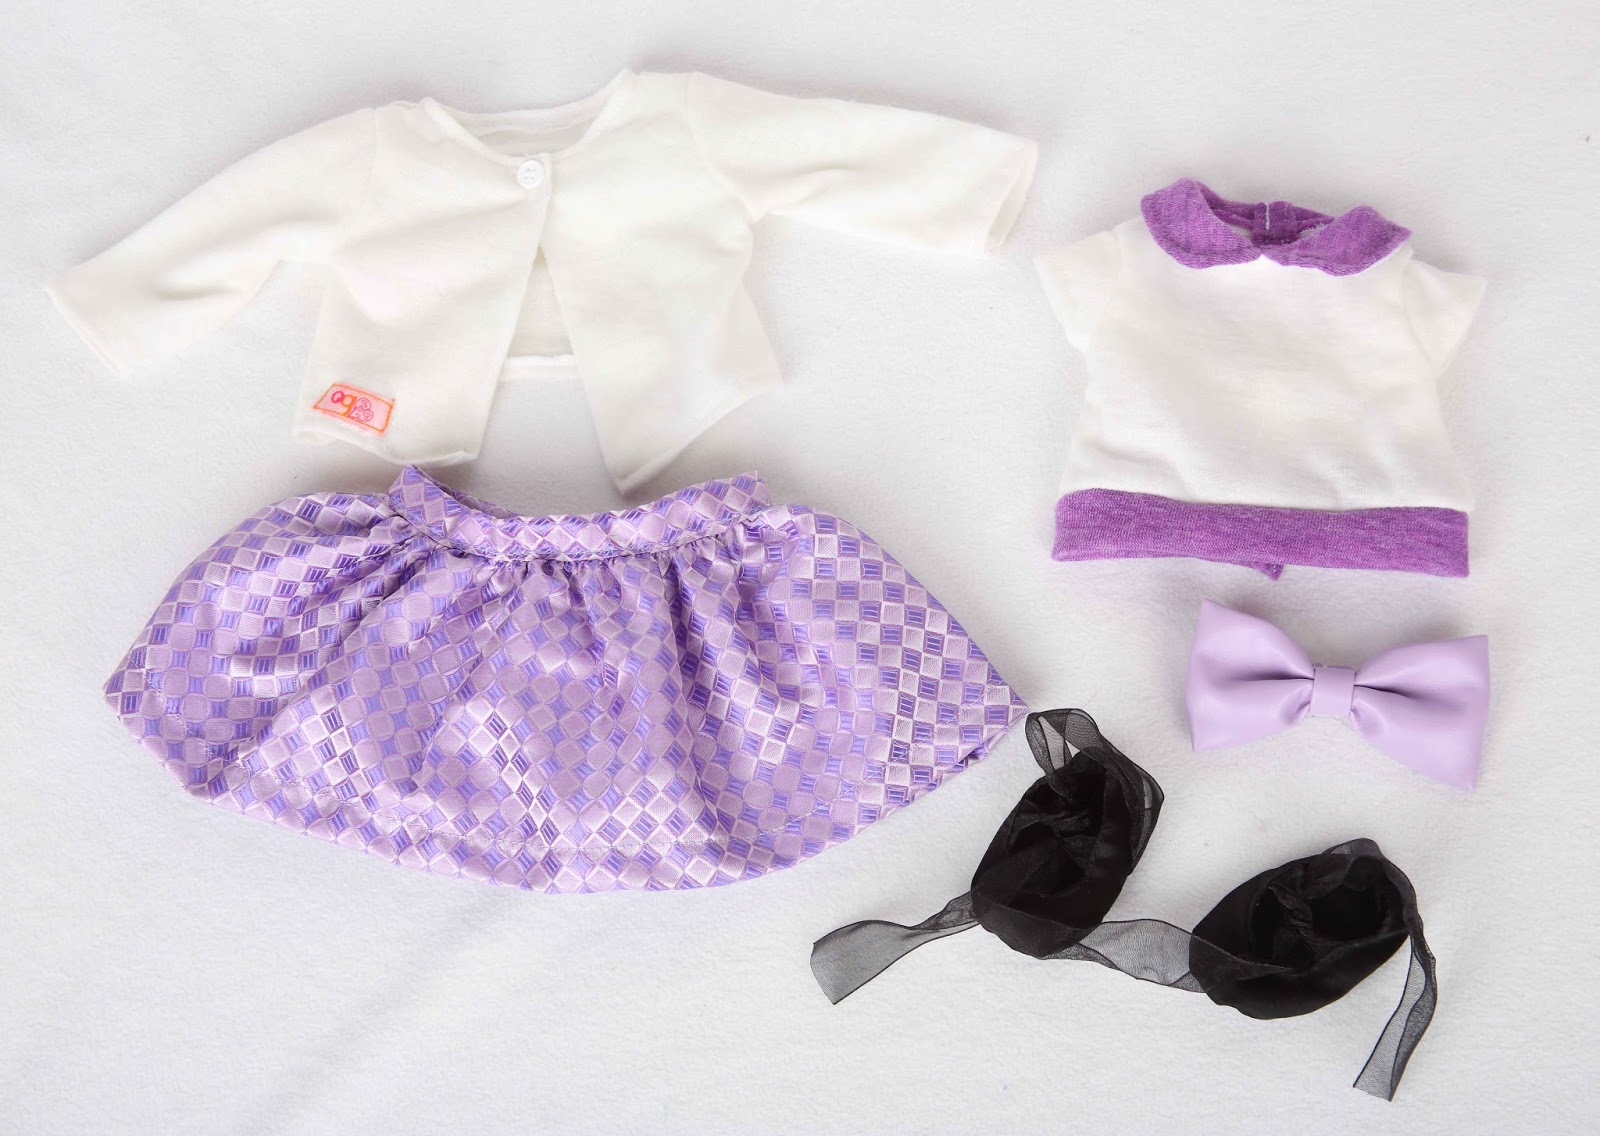 My Journey Girls Dolls Adventures: Our Generation Retro Outfit Review